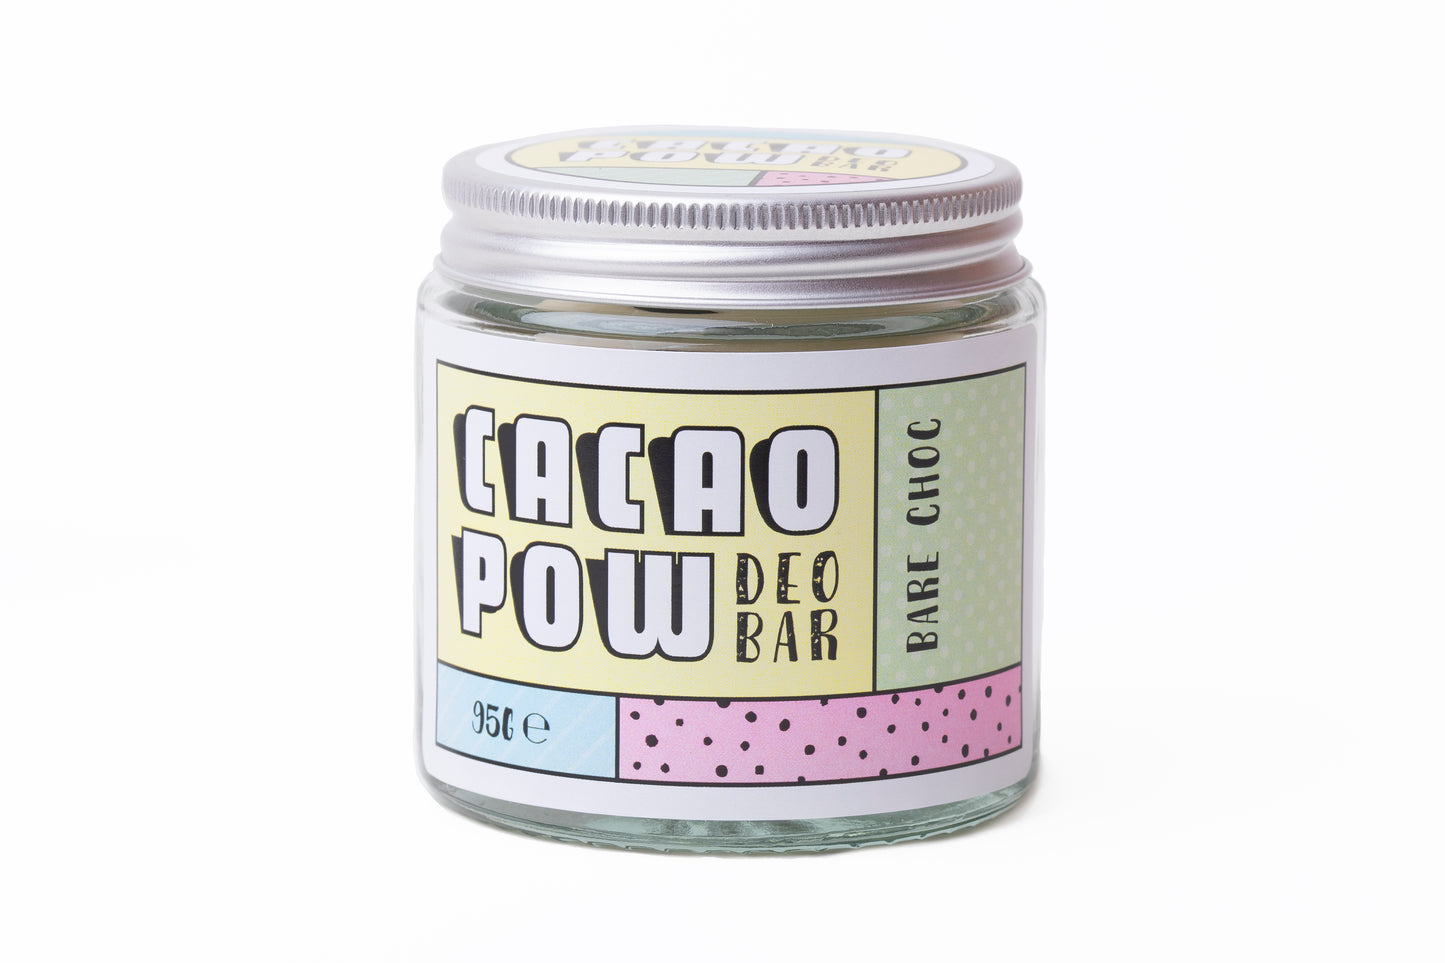 Photo of Cacao Pow natural deodorant bar in glass jar with aluminium lid and colourful label displaying product name. Larger size